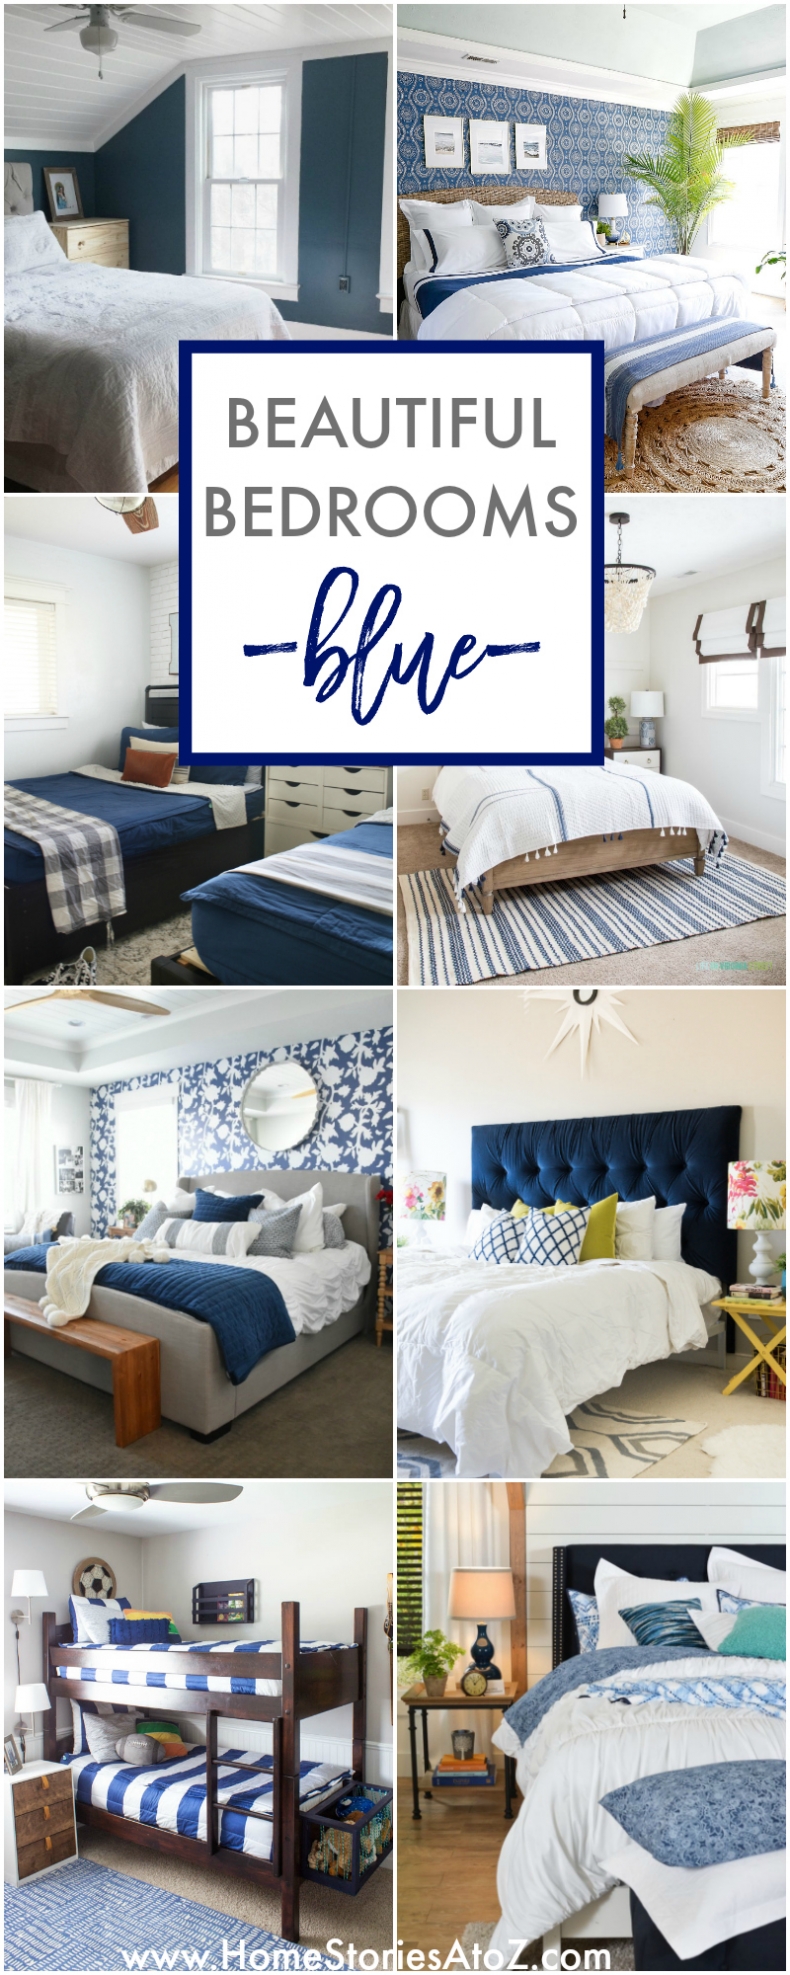 Beautiful Bedrooms in Blue by Home Stories A to Z